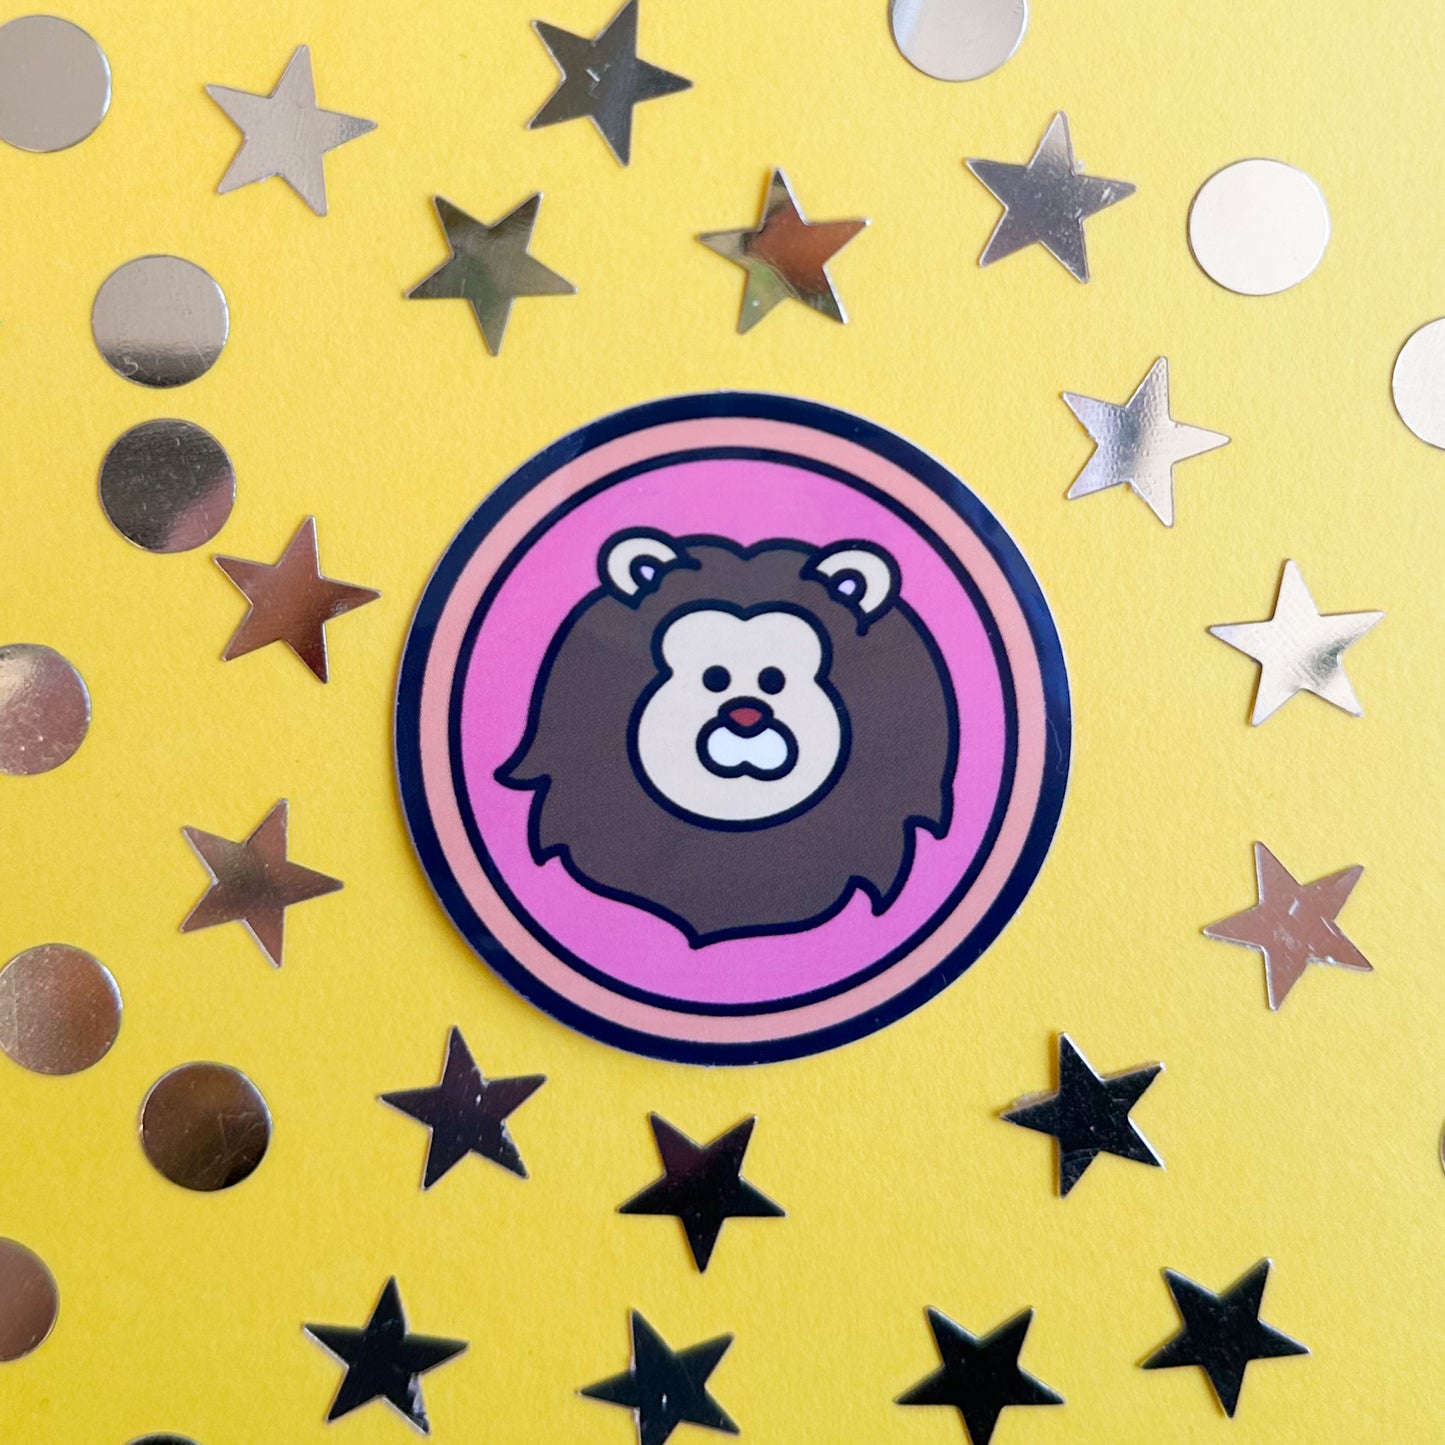 A circle sticker with a cute lion head on it to represent the Leo zodiac sign. The sticker is on a yellow background with gold star and circle confetti around it. 